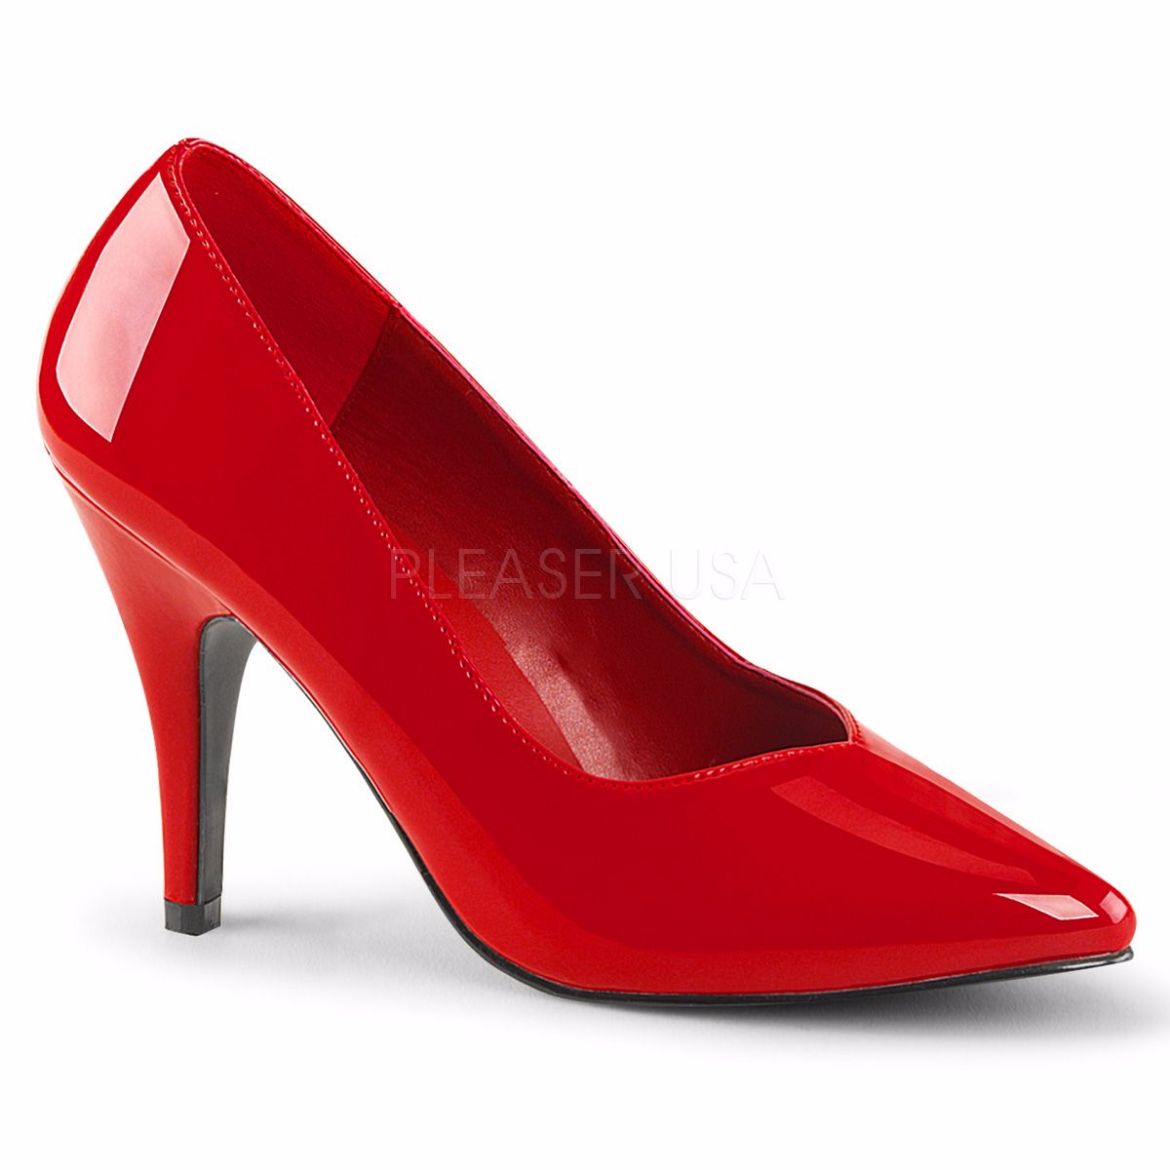 Product image of Pleaser Pink Label Dream-420 Red Patent, 4 inch (10.2 cm) Heel Court Pump Shoes